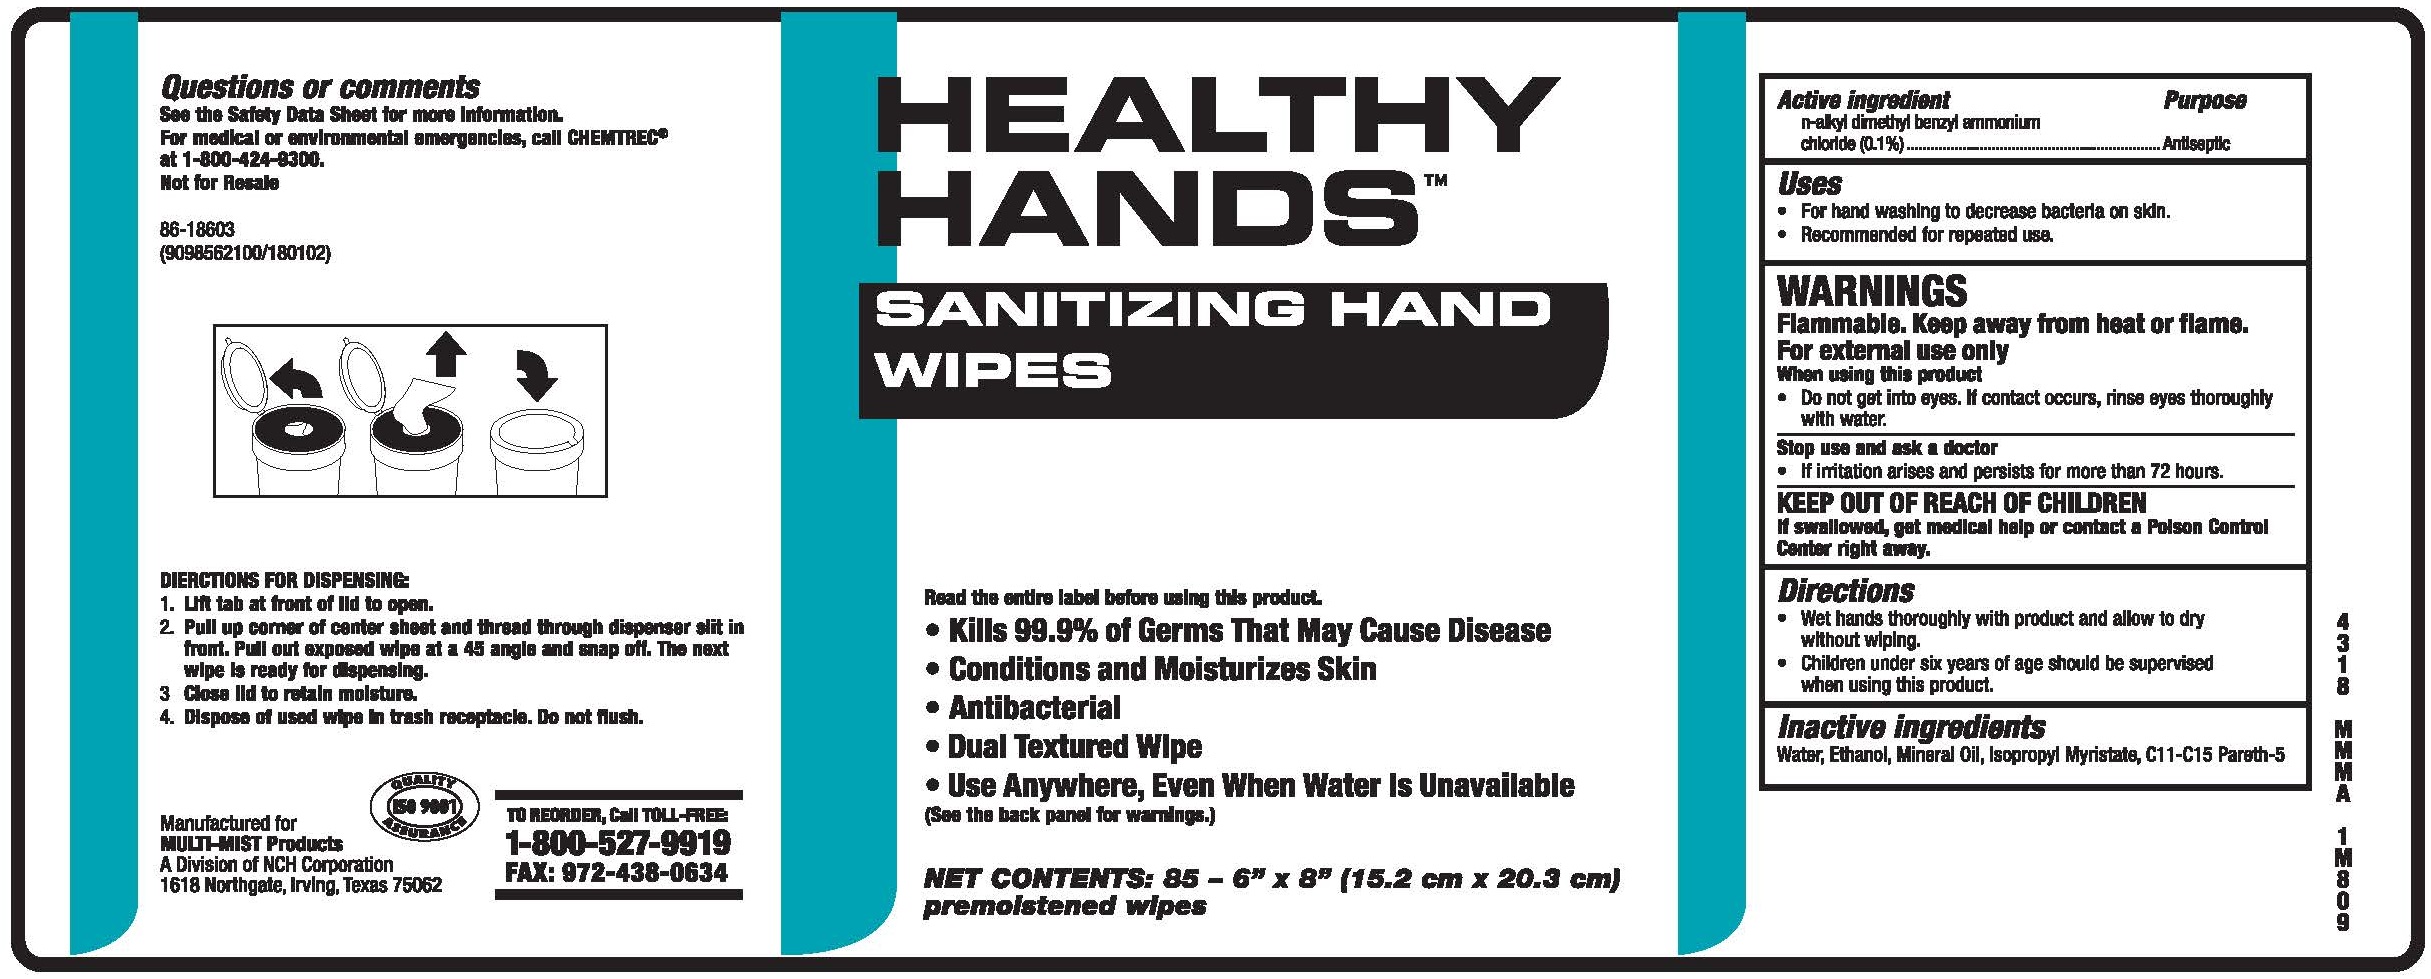 Healthy Hands Sanitizing Hand Wipes